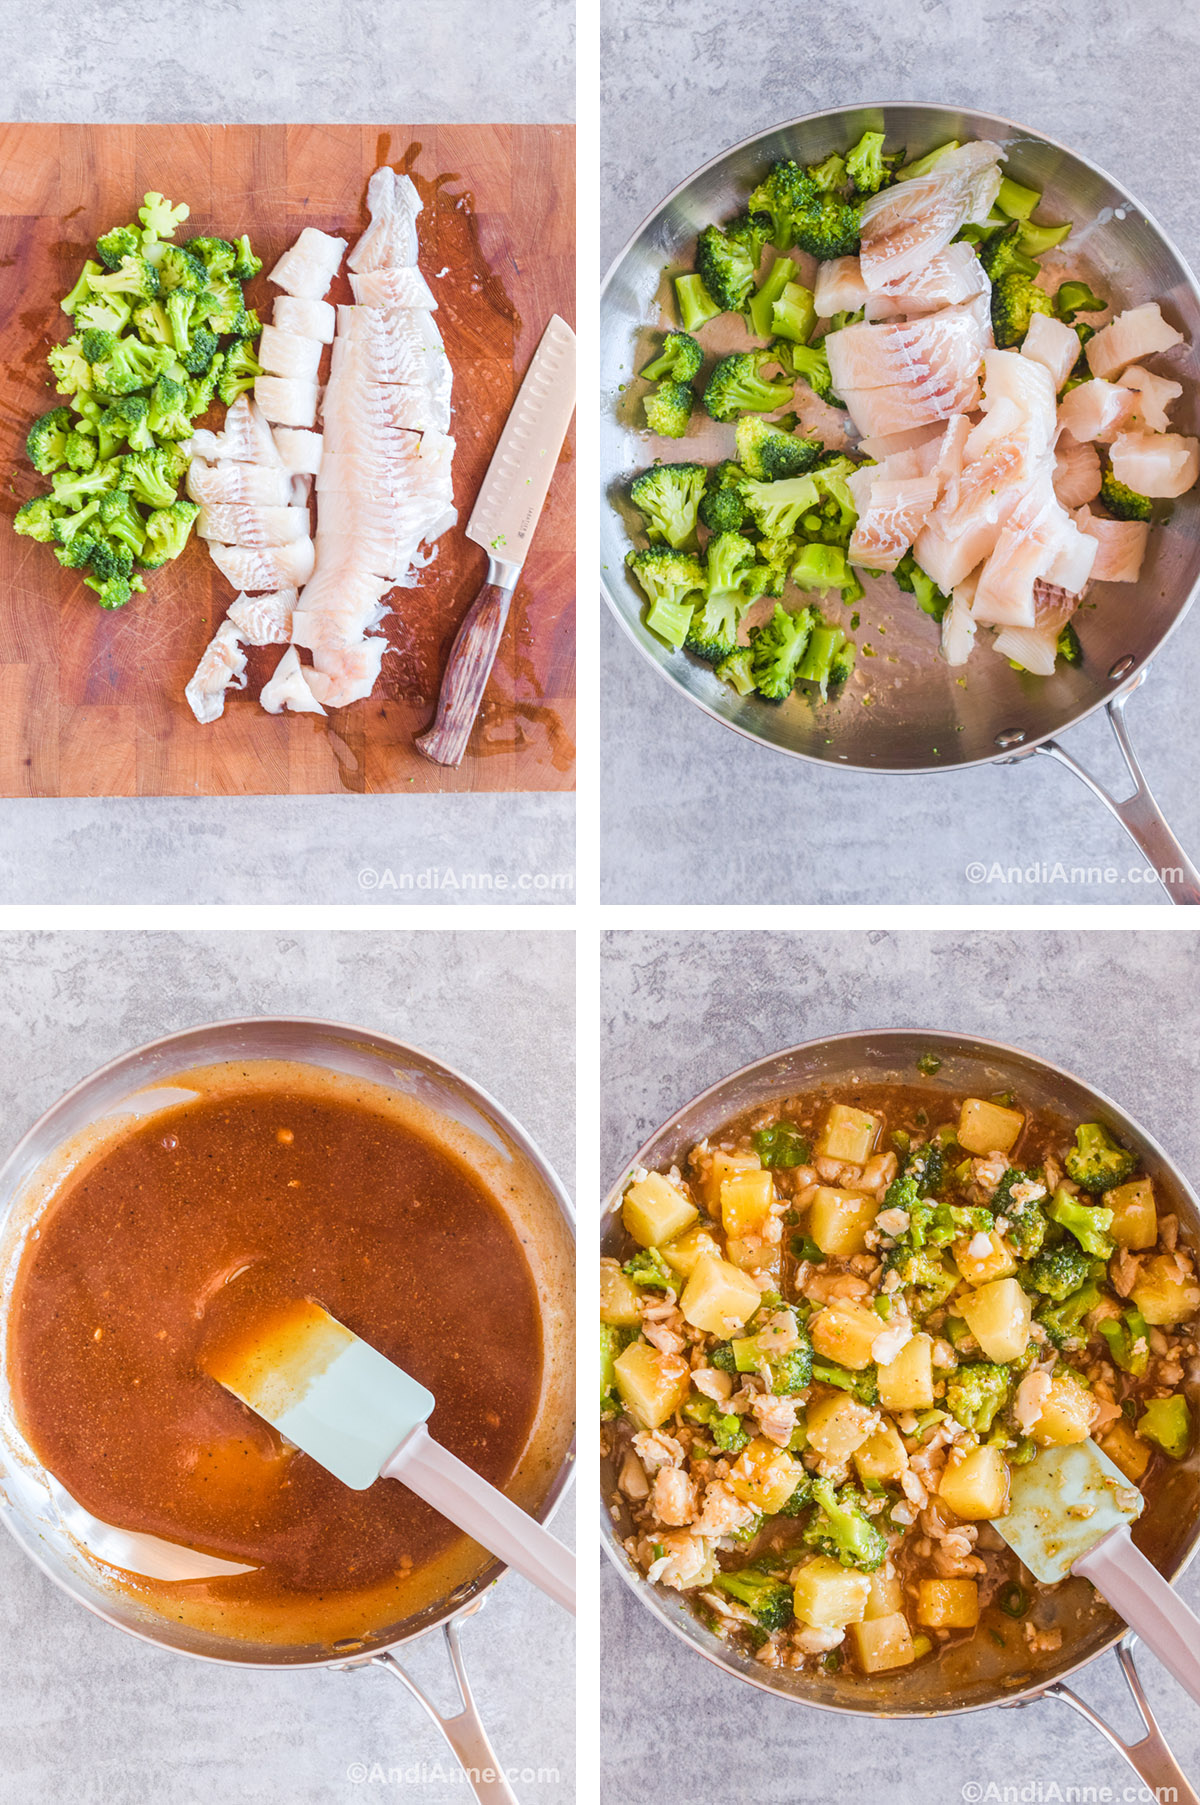 Four images showing steps to find recipe including chopped broccoli and fish fillets on counter with a knife. A frying pan with raw fish and broccoli. A pan with brown sweet and sour sauce. And a pan with pineapple chunks, broccoli, and fish in brown sauce.